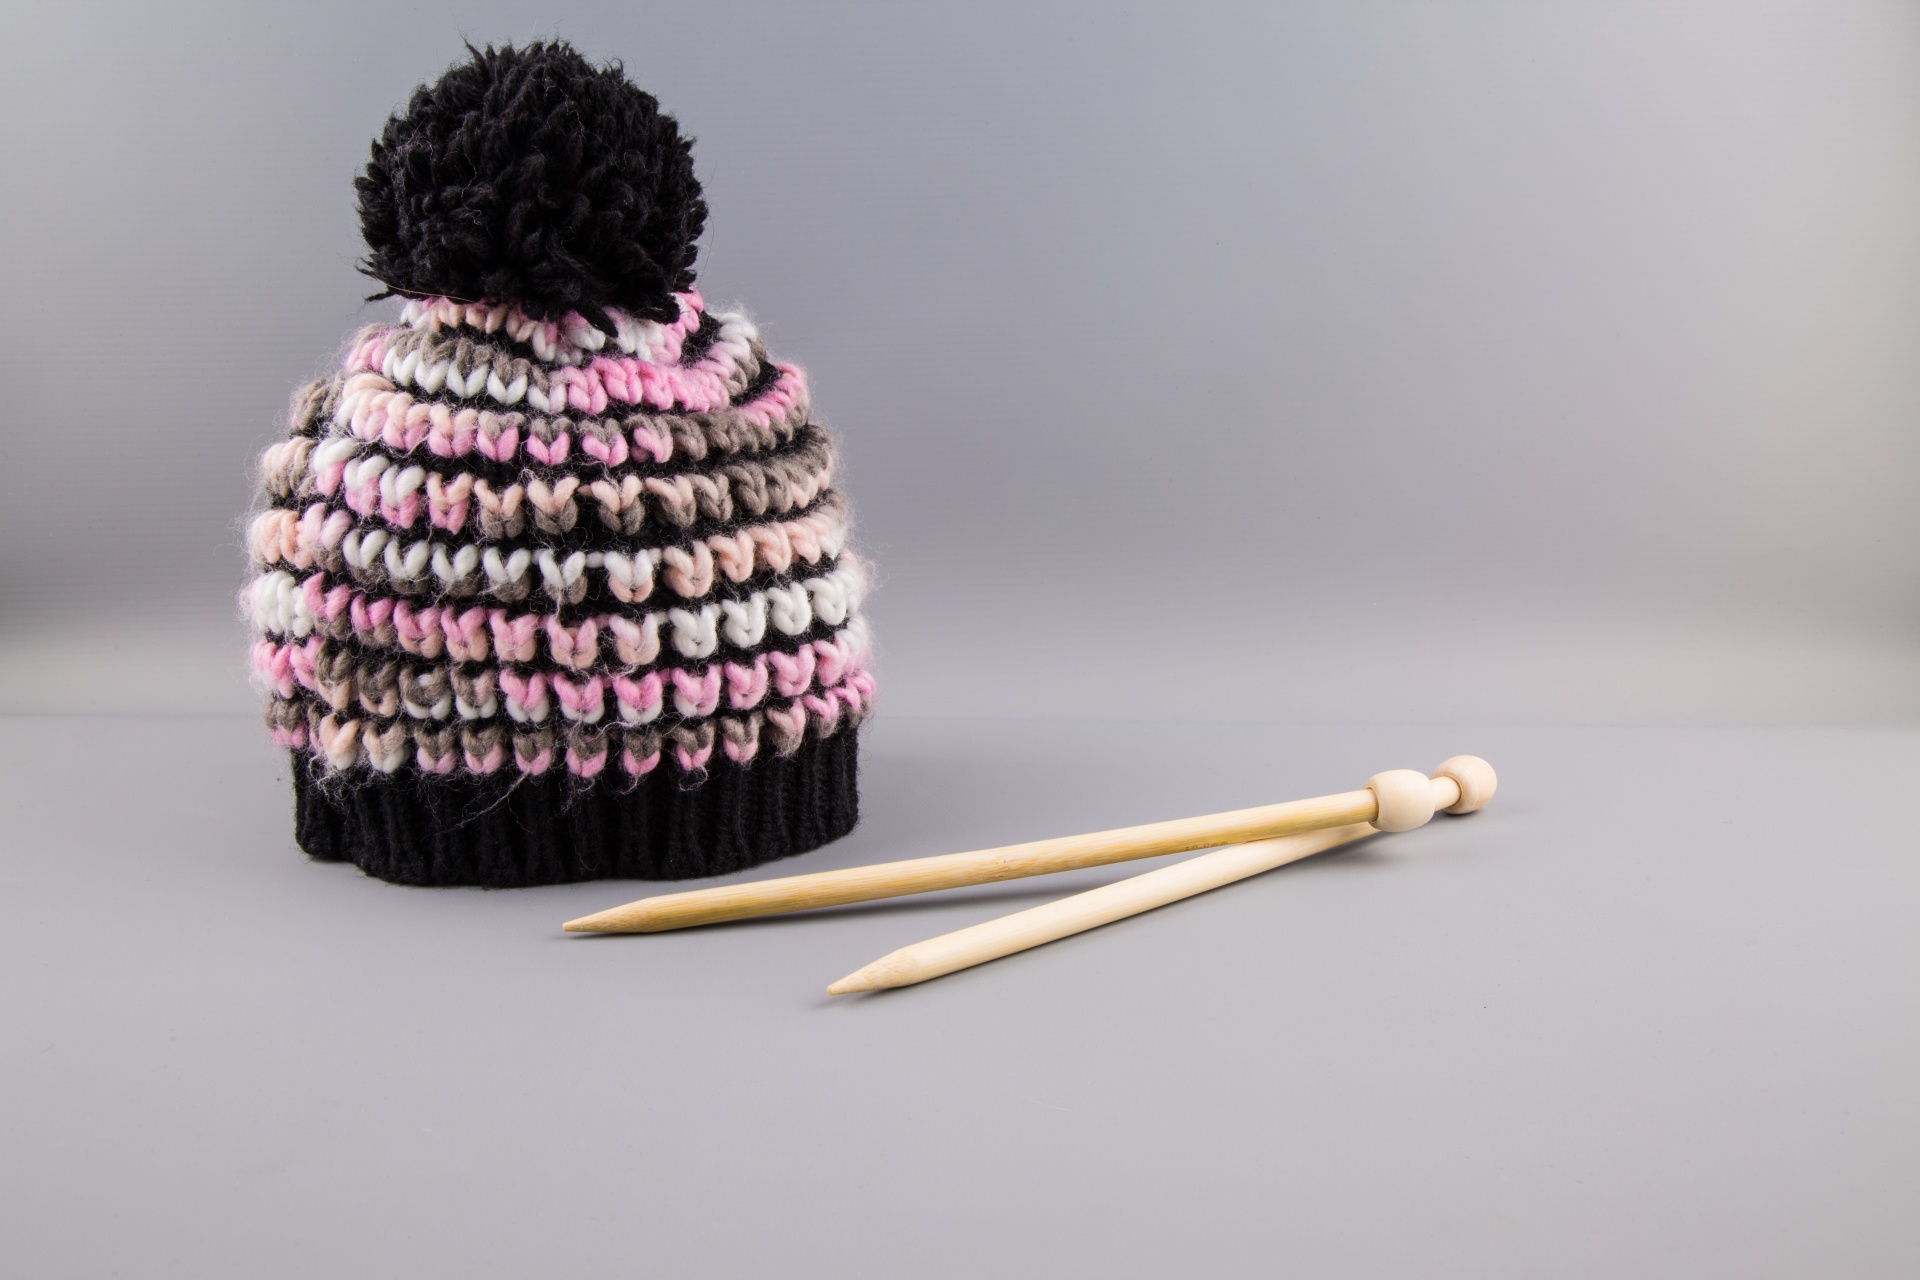 knitting-cap-free-stock-photo-public-domain-pictures